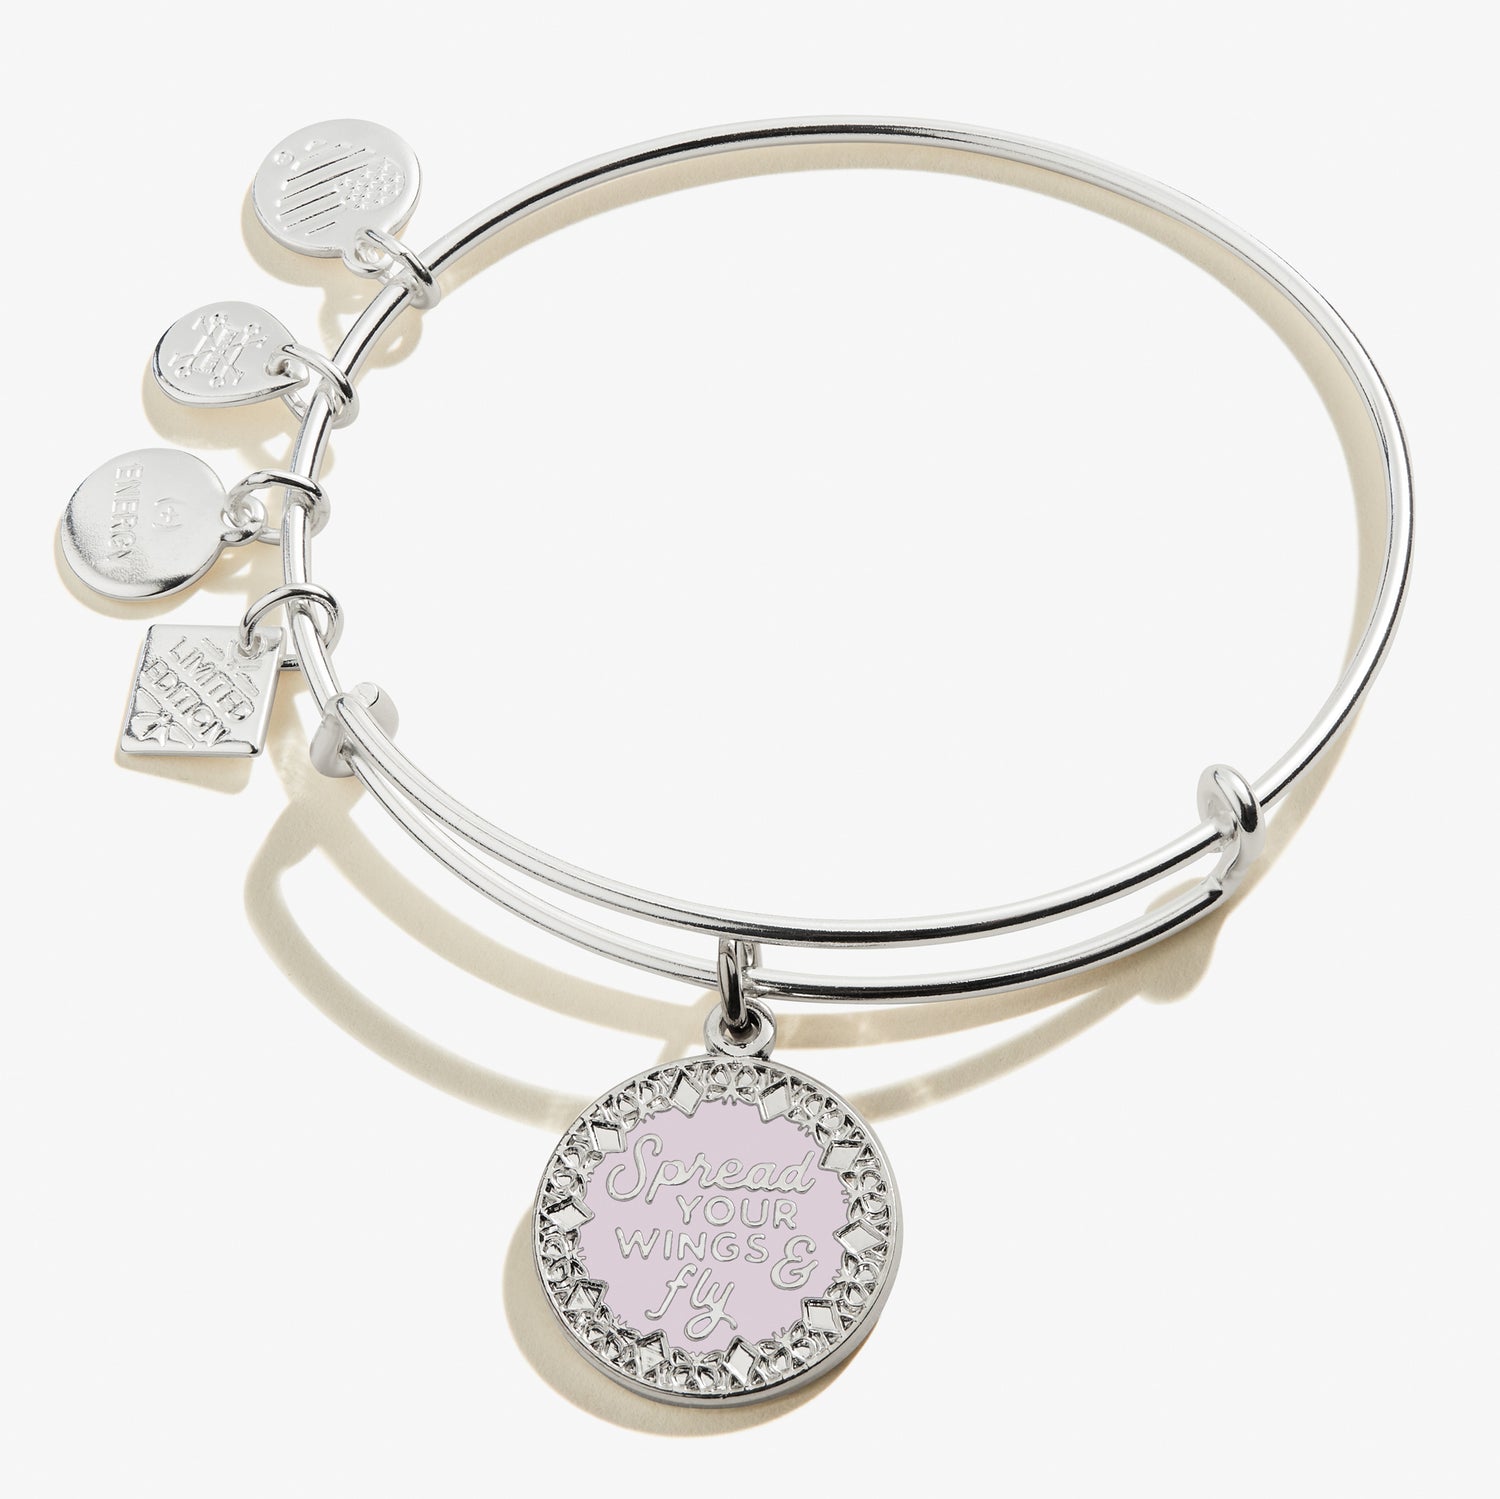 Spread Your Wings and Fly Charm Bangle